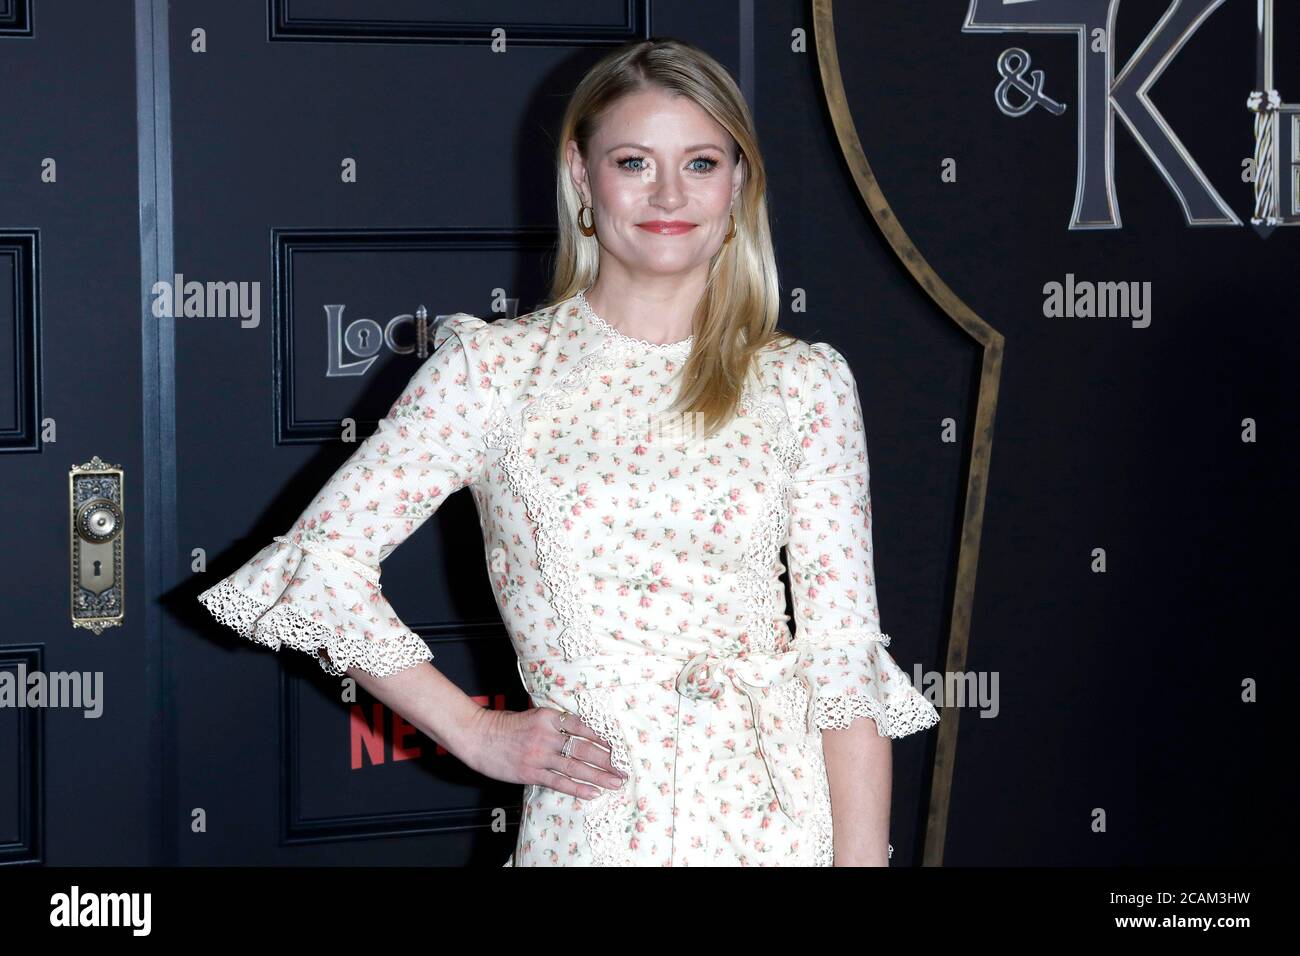 LOS ANGELES - FEB 5:  Emilie de Ravin at the 'Locke & Key' Series Premiere Screening at the Egyptian Theater on February 5, 2020 in Los Angeles, CA Stock Photo